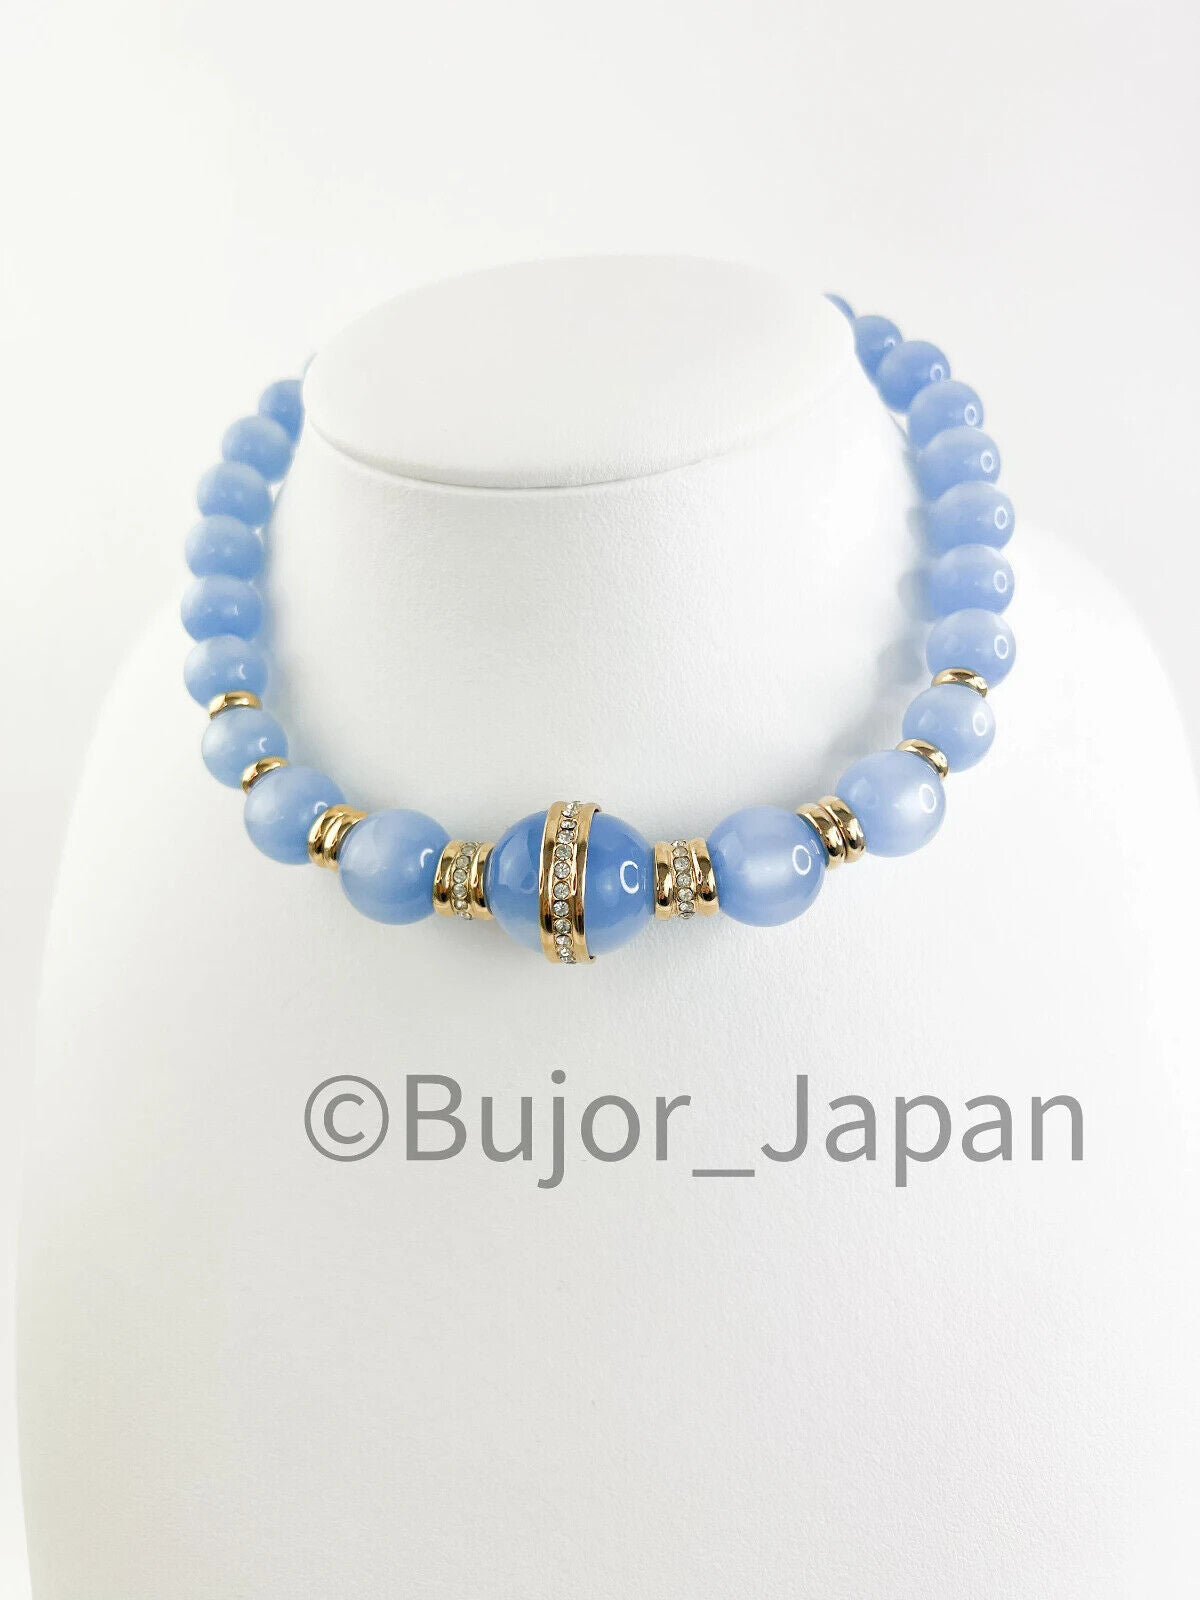 Givenchy Vintage necklace Blue Glass Lucite choker  beaded Rhinestone Gold  necklace choker, Chain Necklace, Gift for her, Jewelry for women